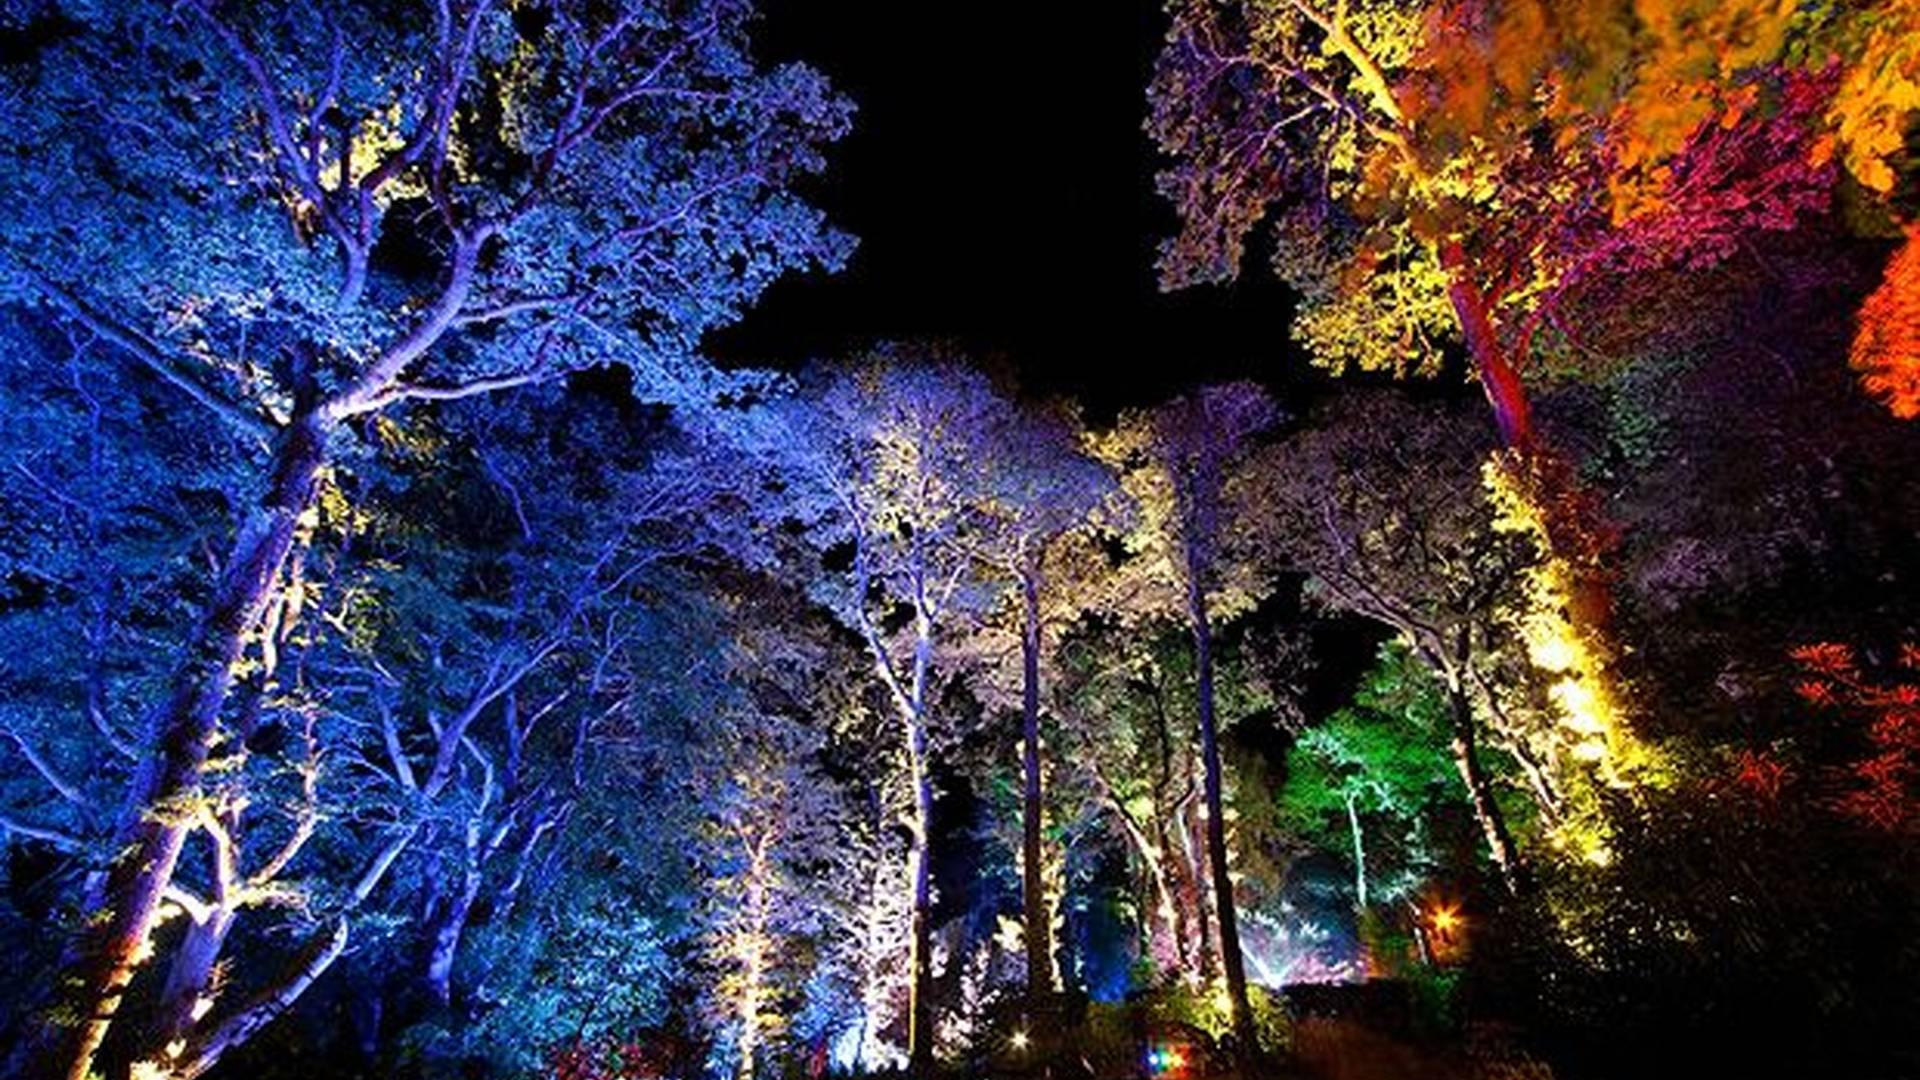 The Enchanted Forest photo